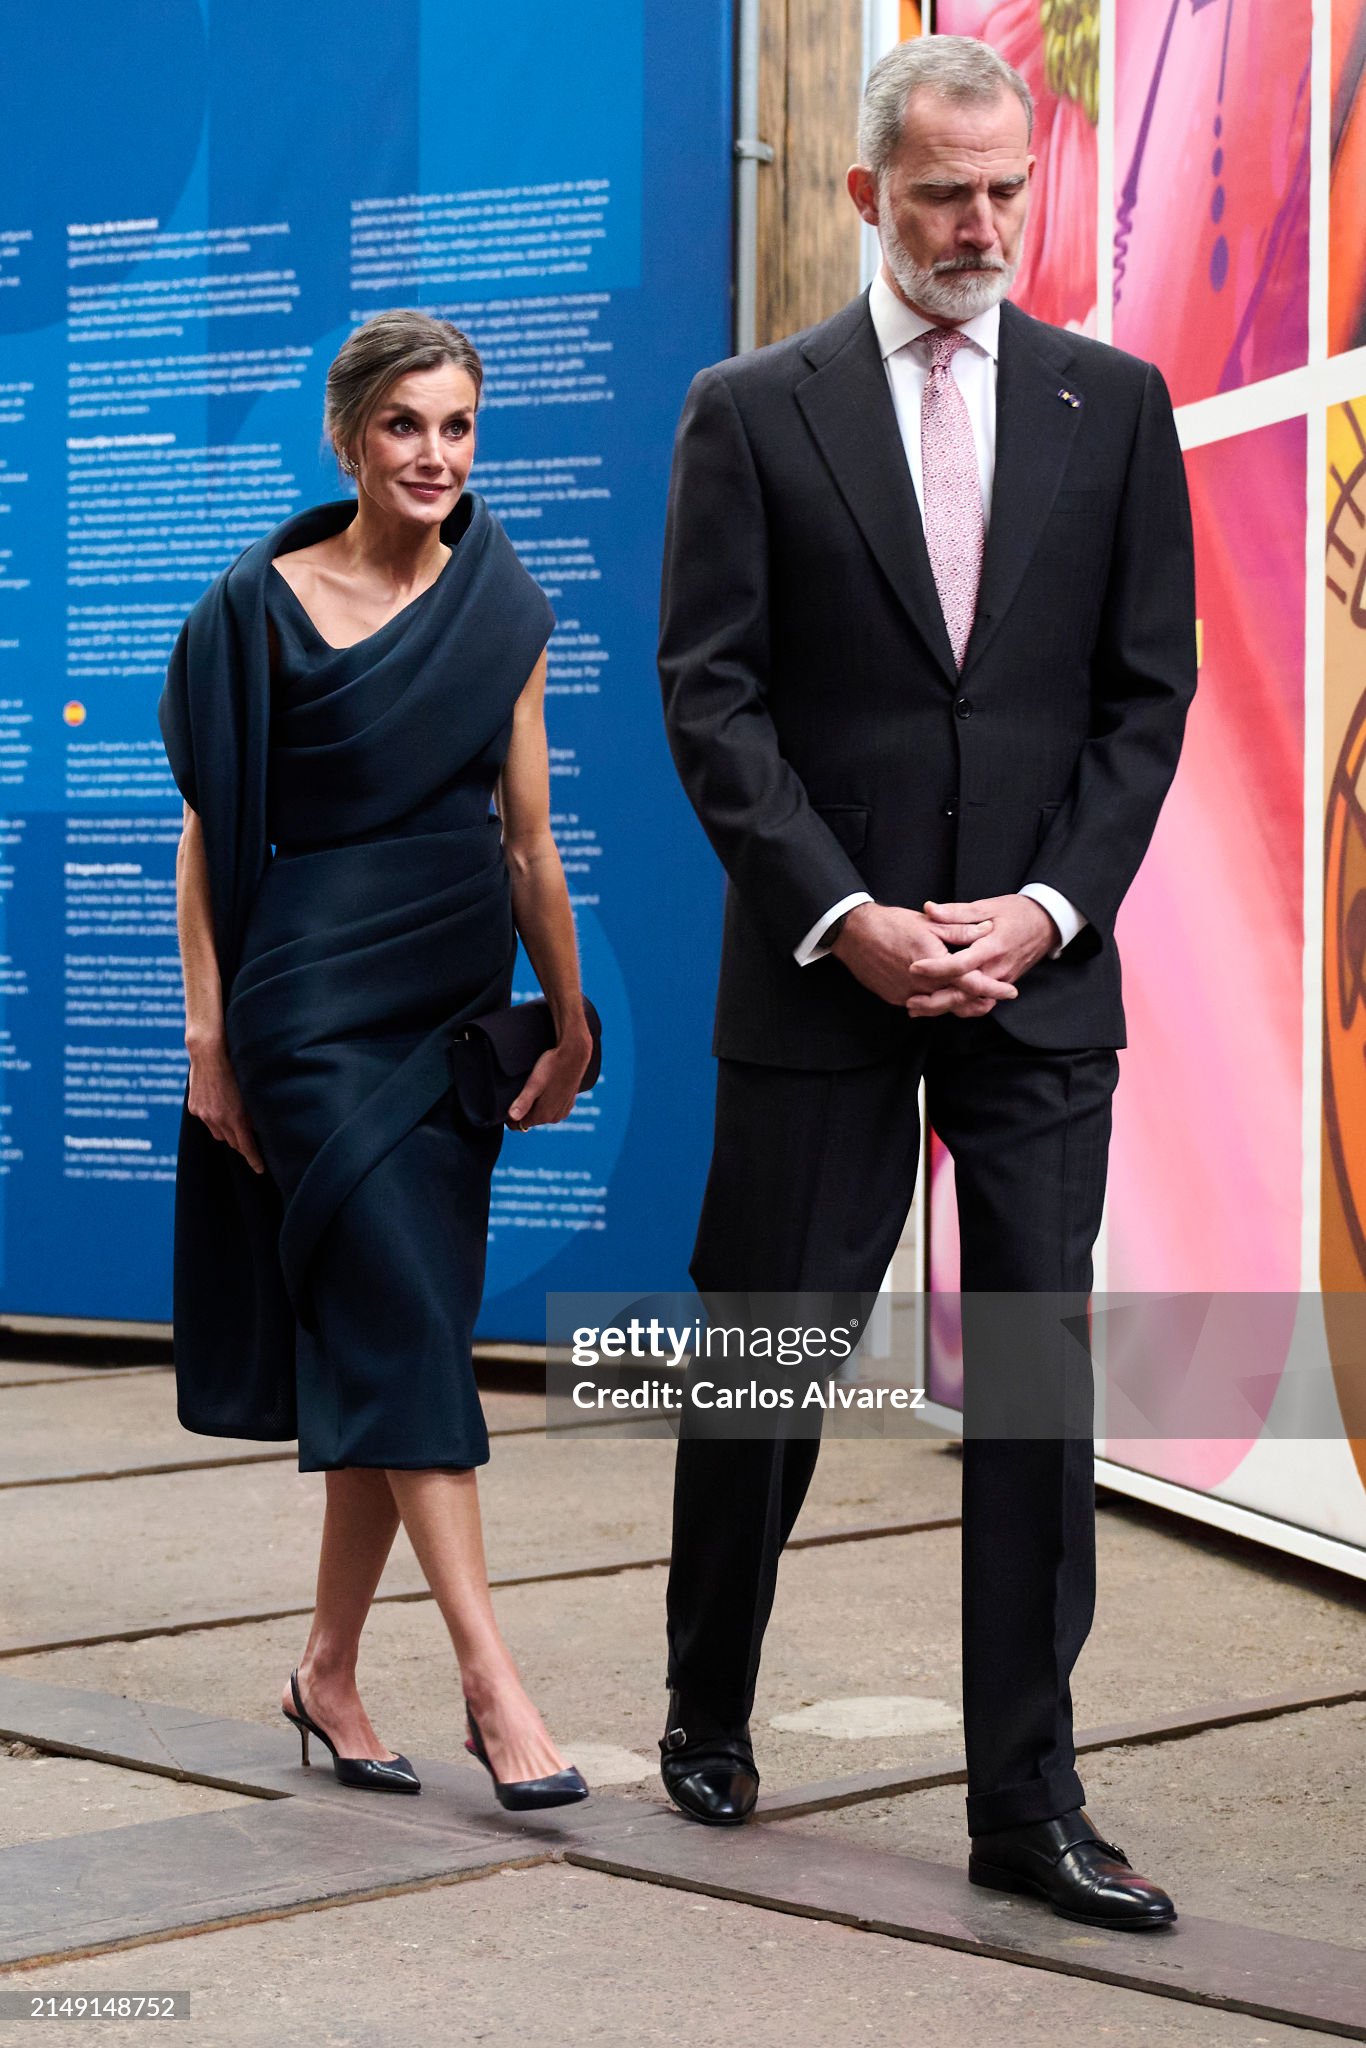 amsterdam-netherlands-king-felipe-vi-of-spain-and-queen-letizia-of-spain-attend-a-reception.jpg